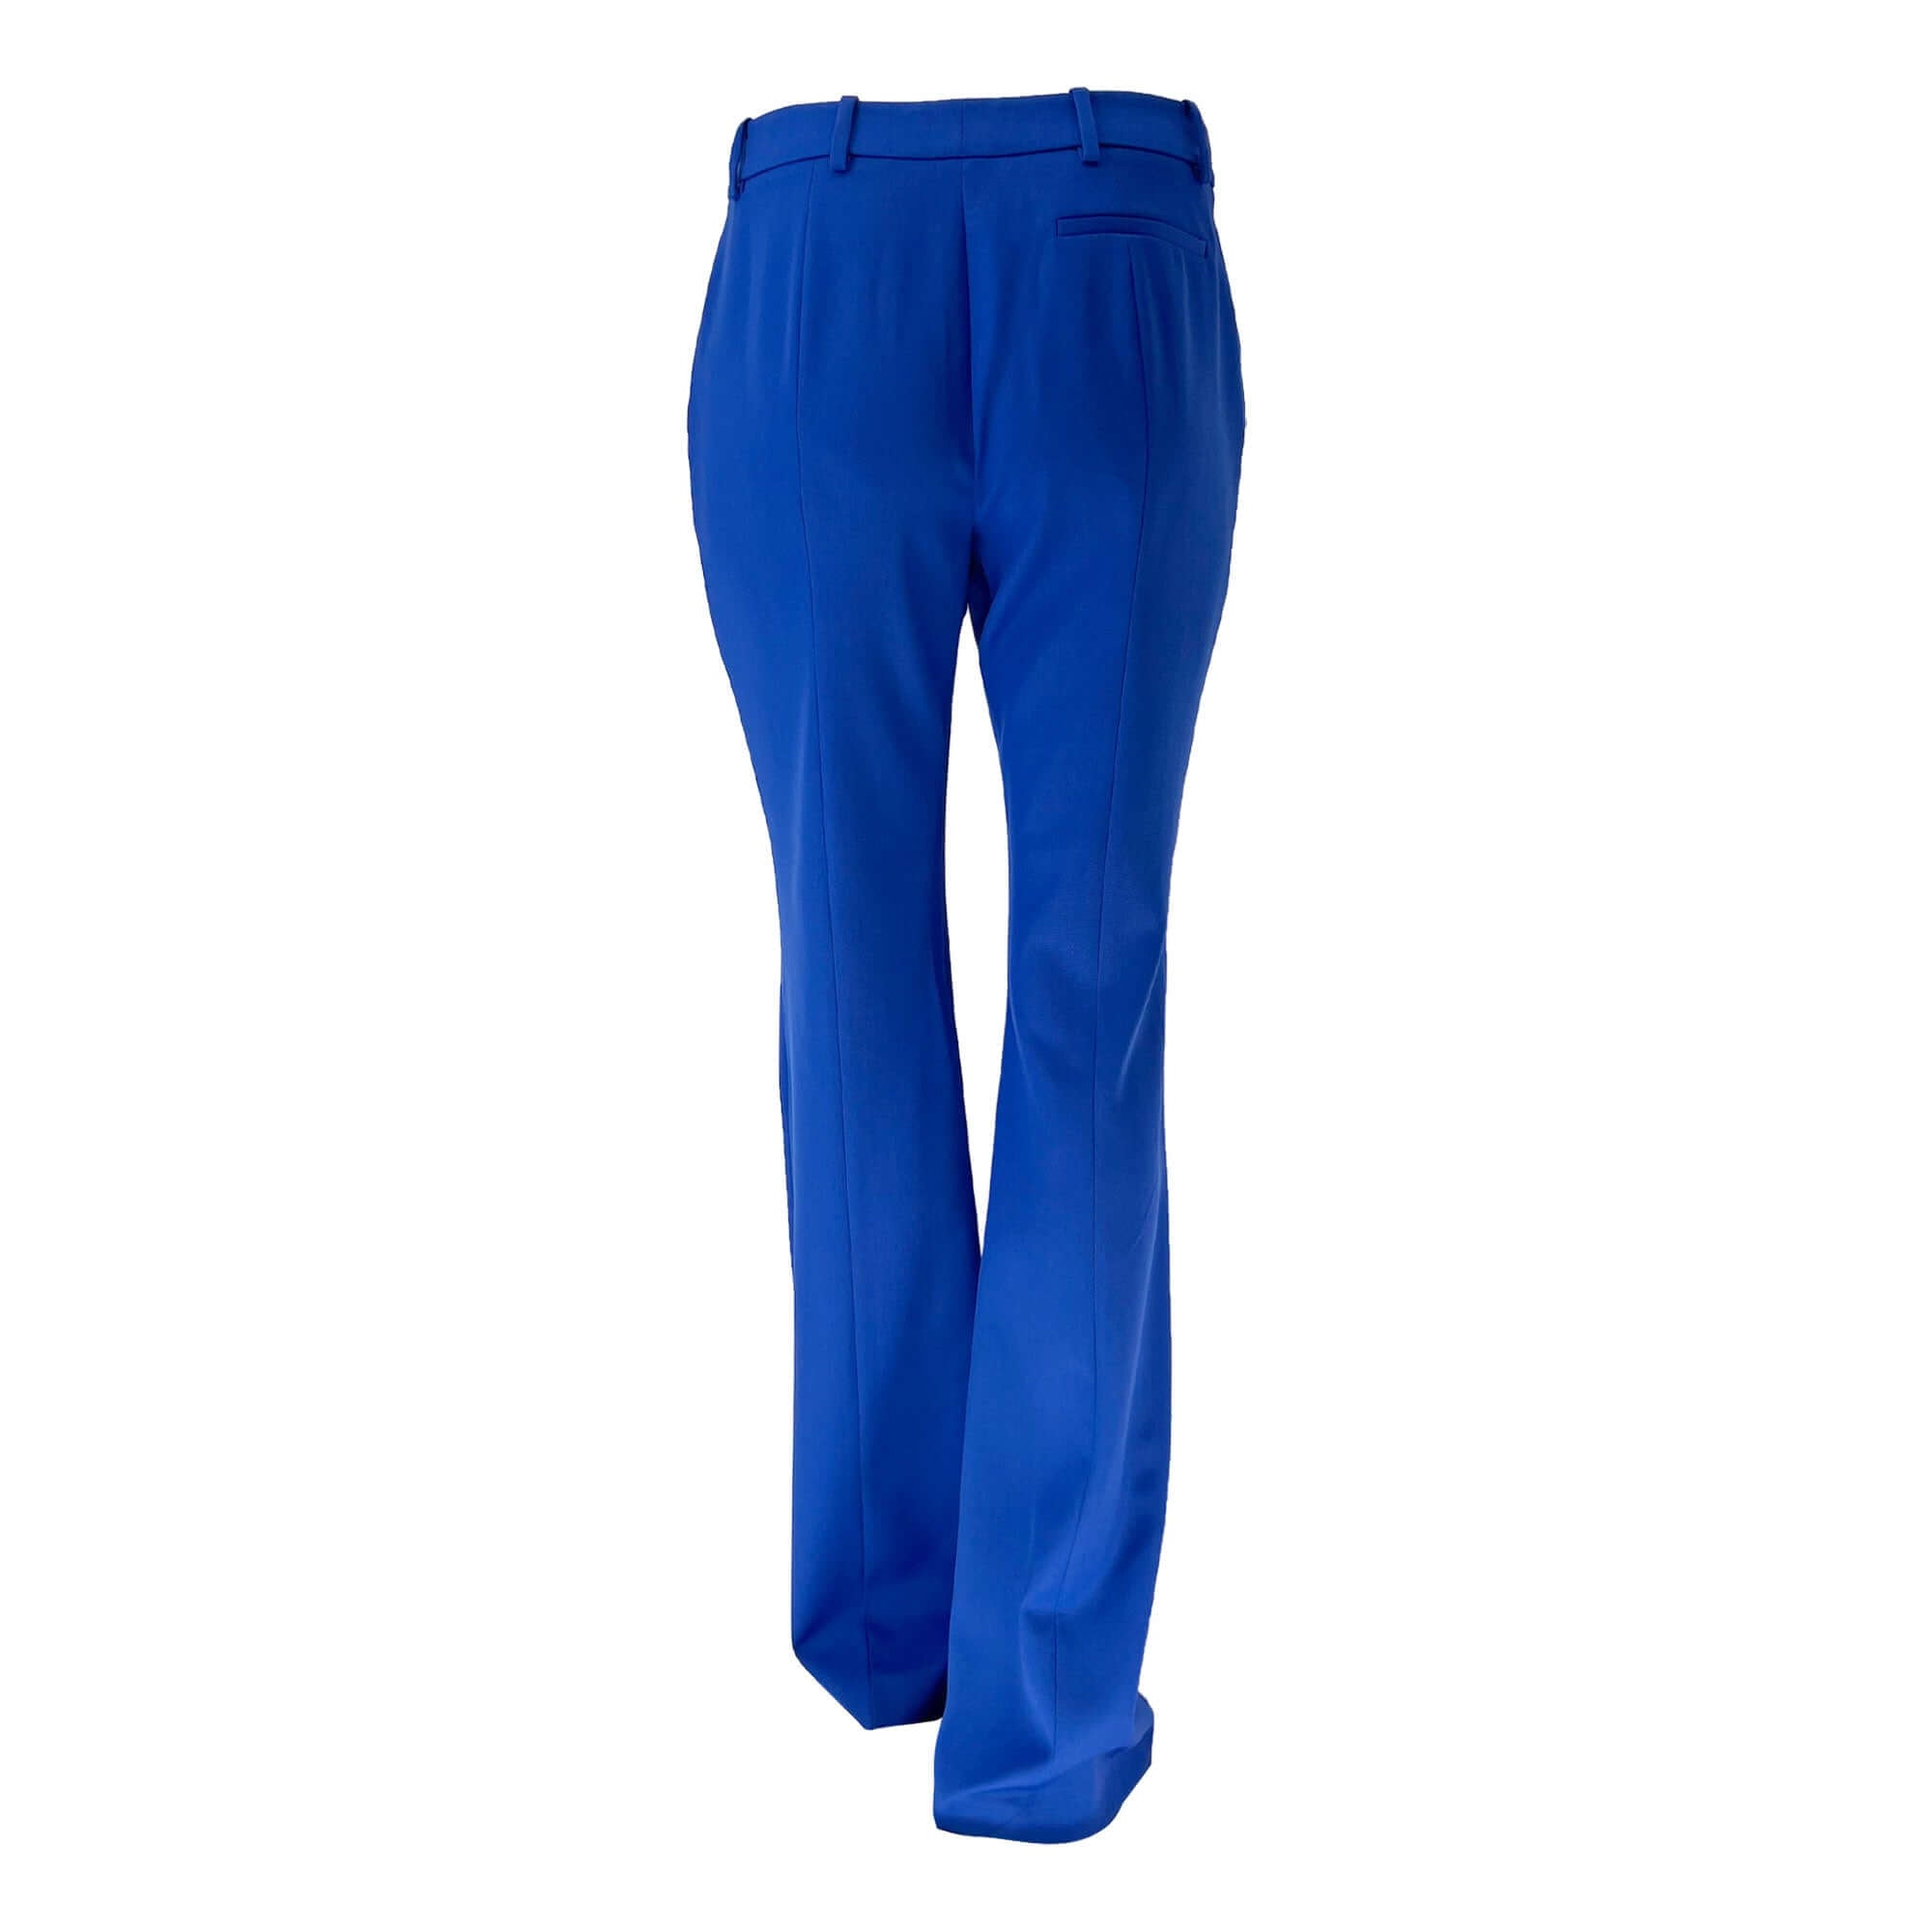 Alexander McQueen blue flared trousers back